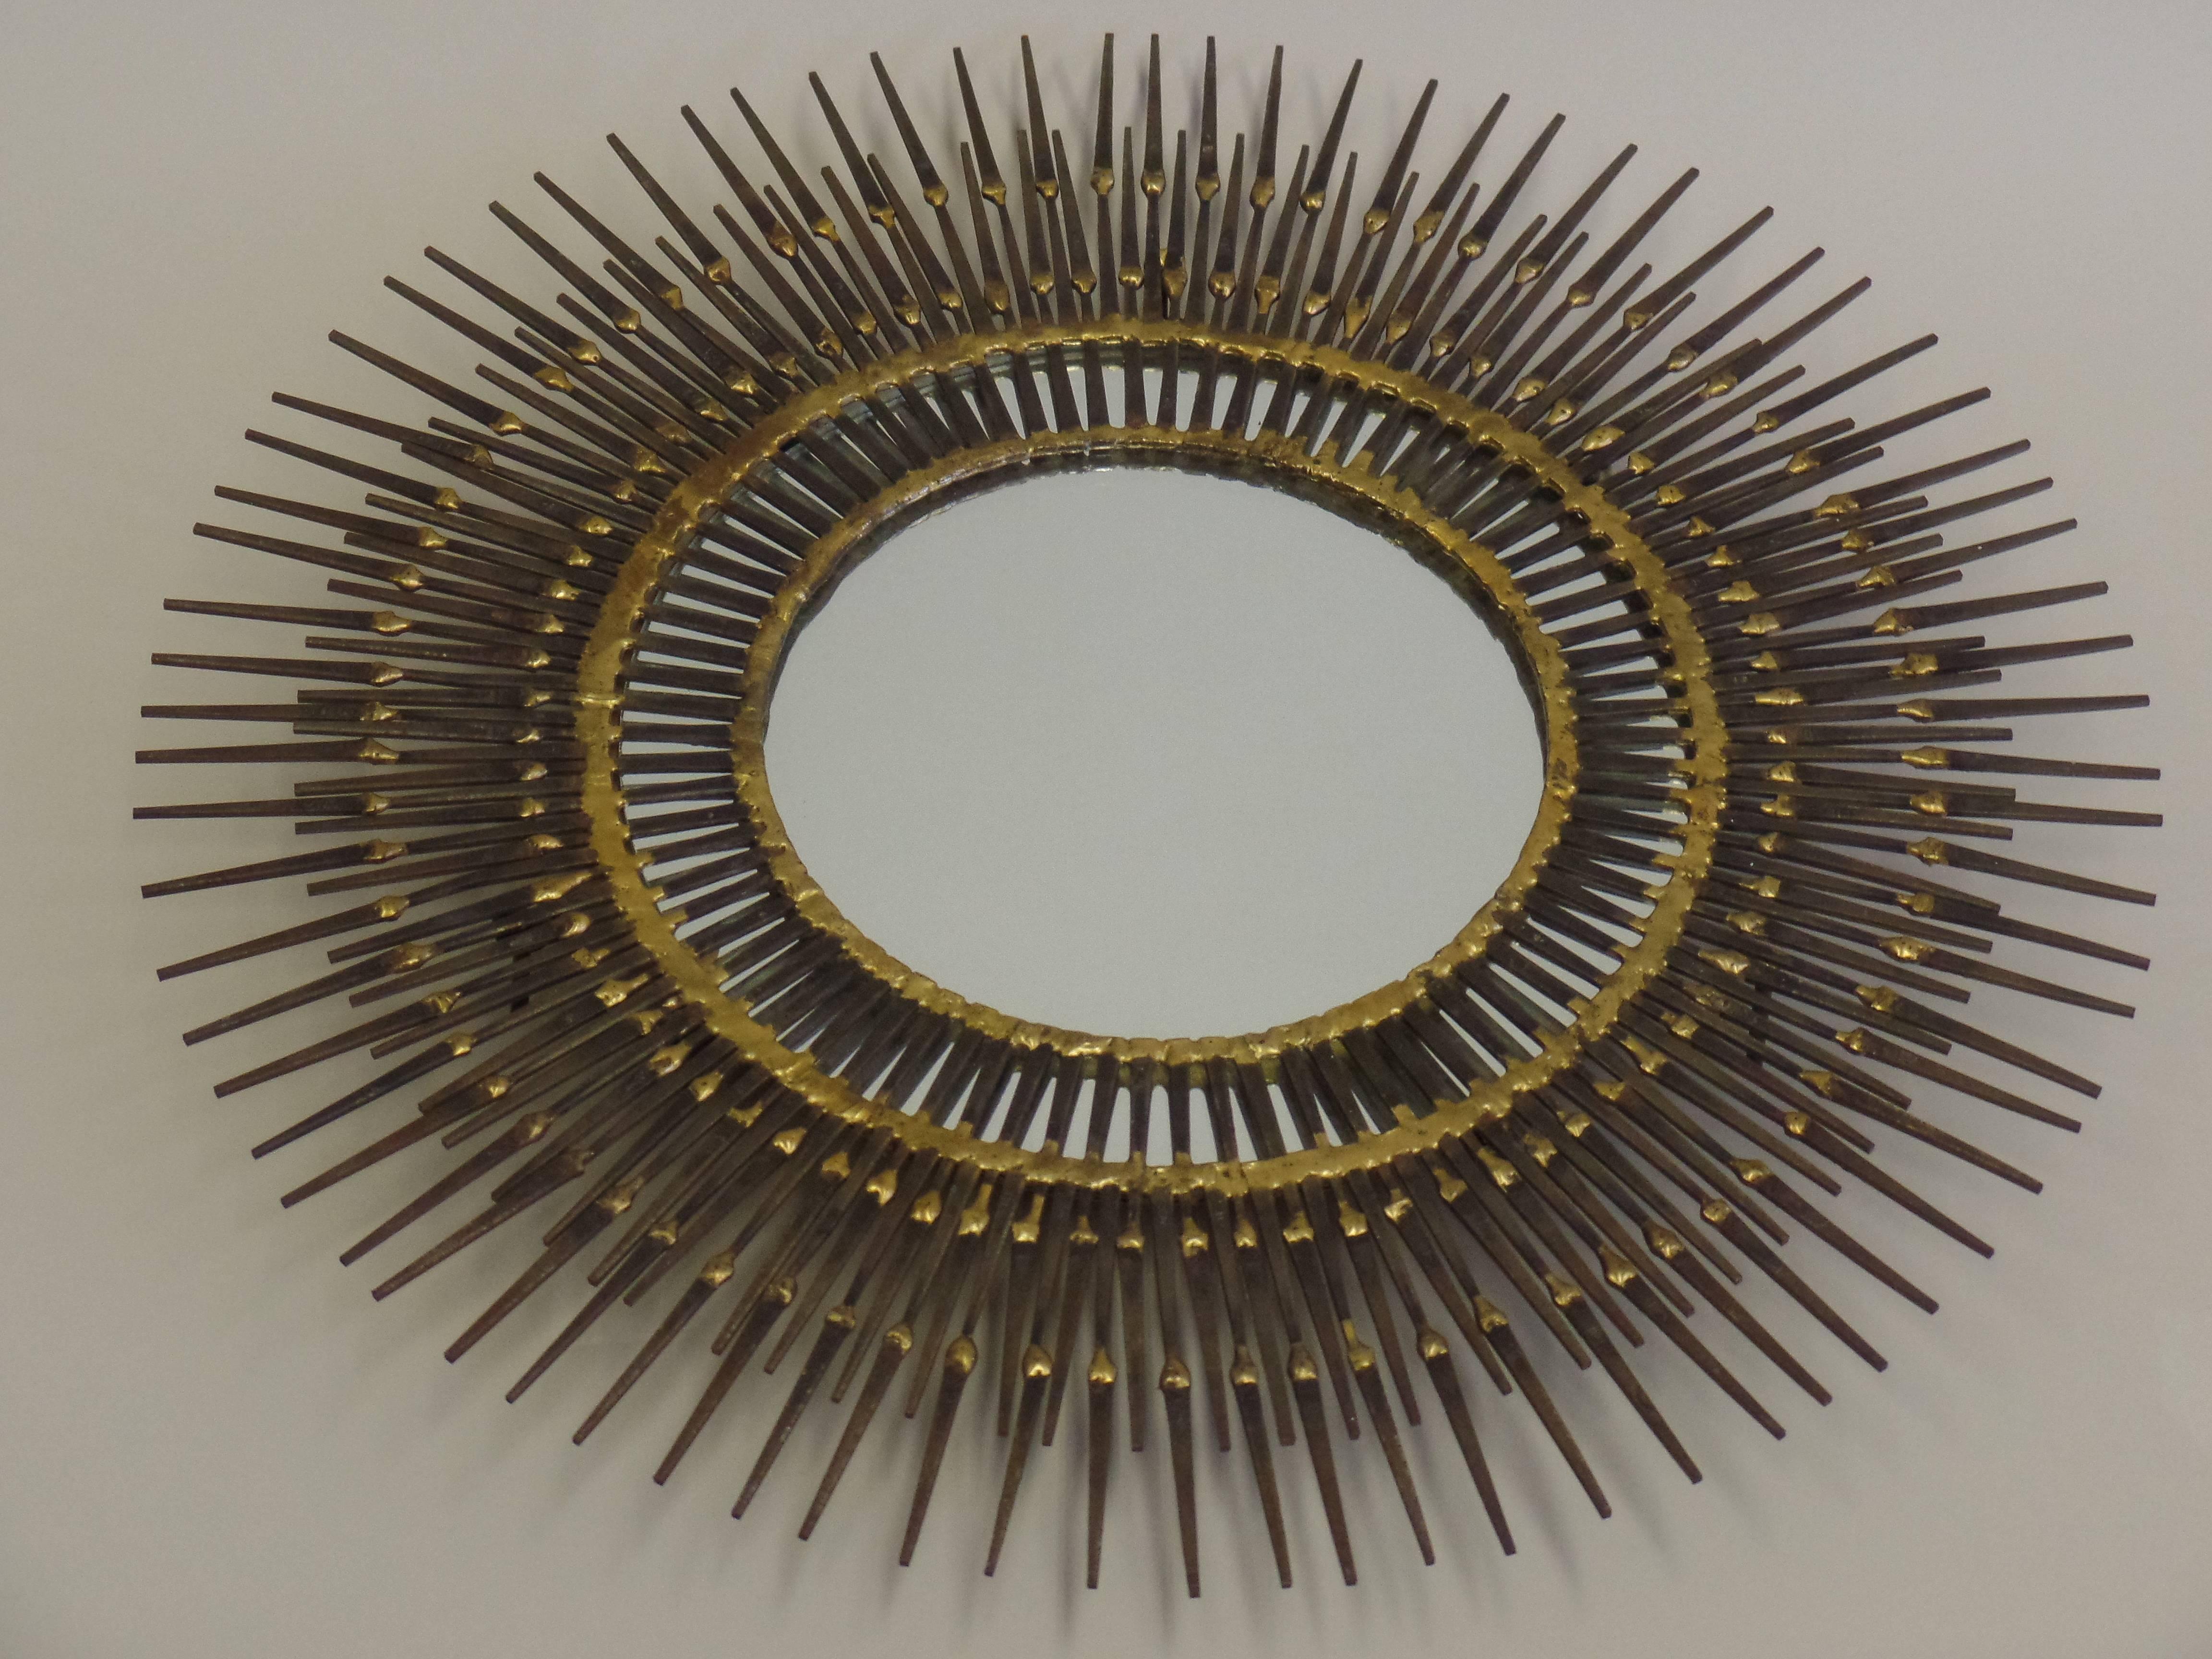 Sculptural wall mirror by the Canadian art, Bela in the form of sunburst.

A delicate Mid-Century work of art composed of multiple levels of steel nails soldered together in solid brass using open tracery to reveal a mirror underneath a ring of